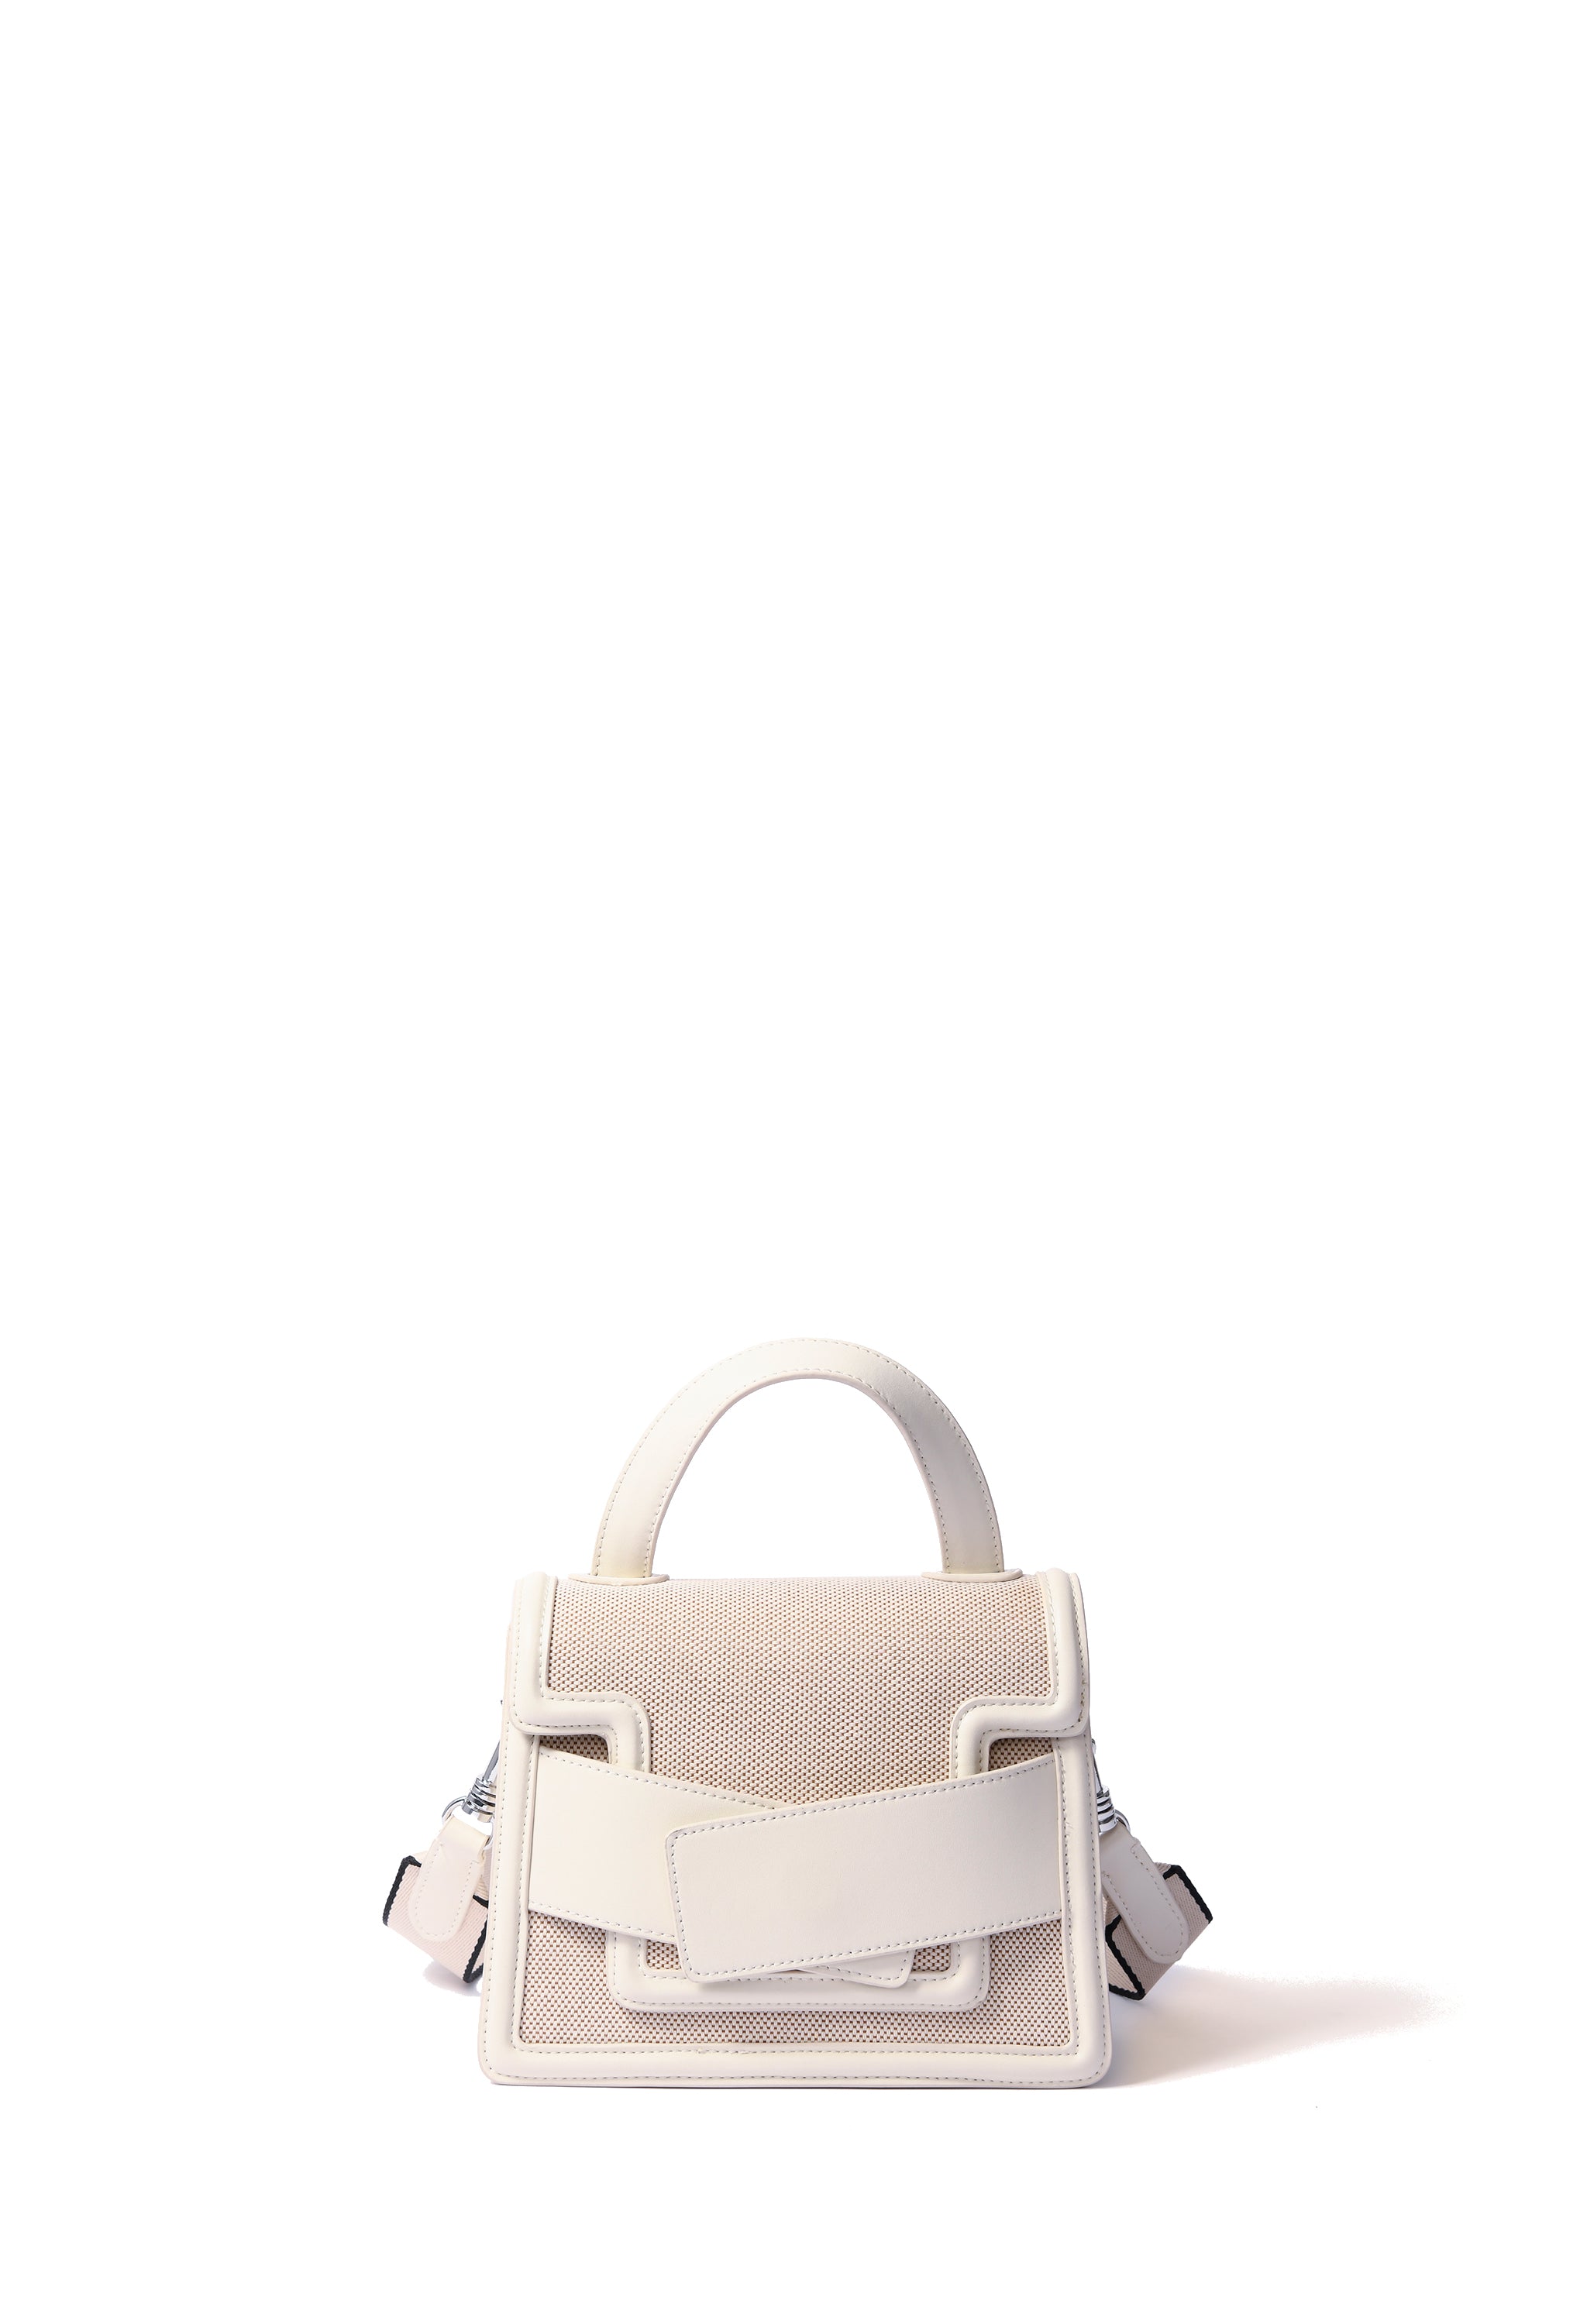 Evelyn Bag in canvas and genuine leather, White